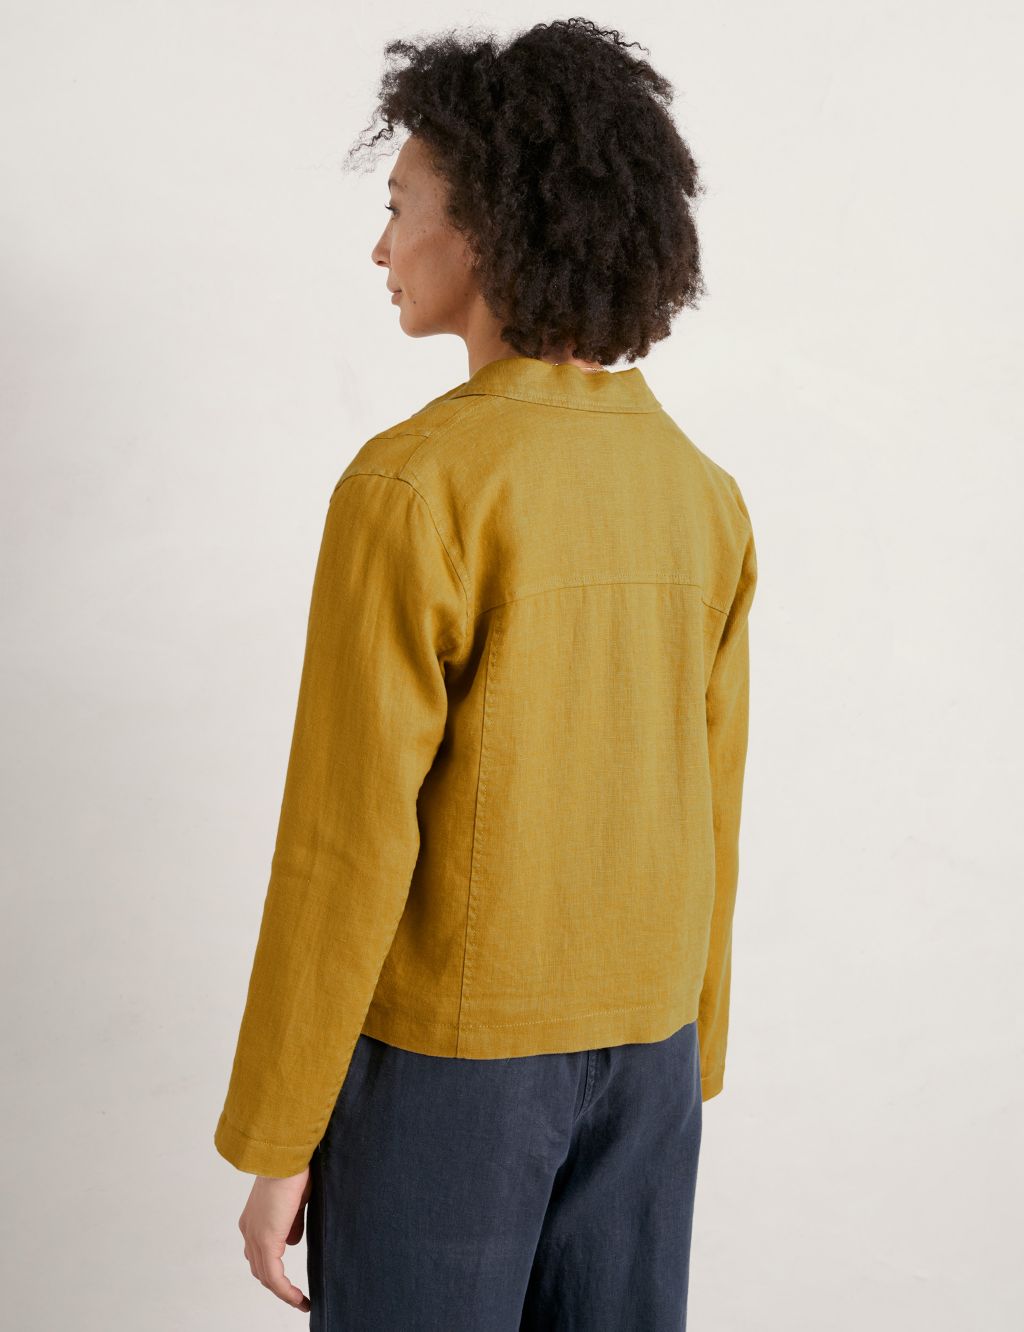 Pure Linen Collared Short Jacket image 3